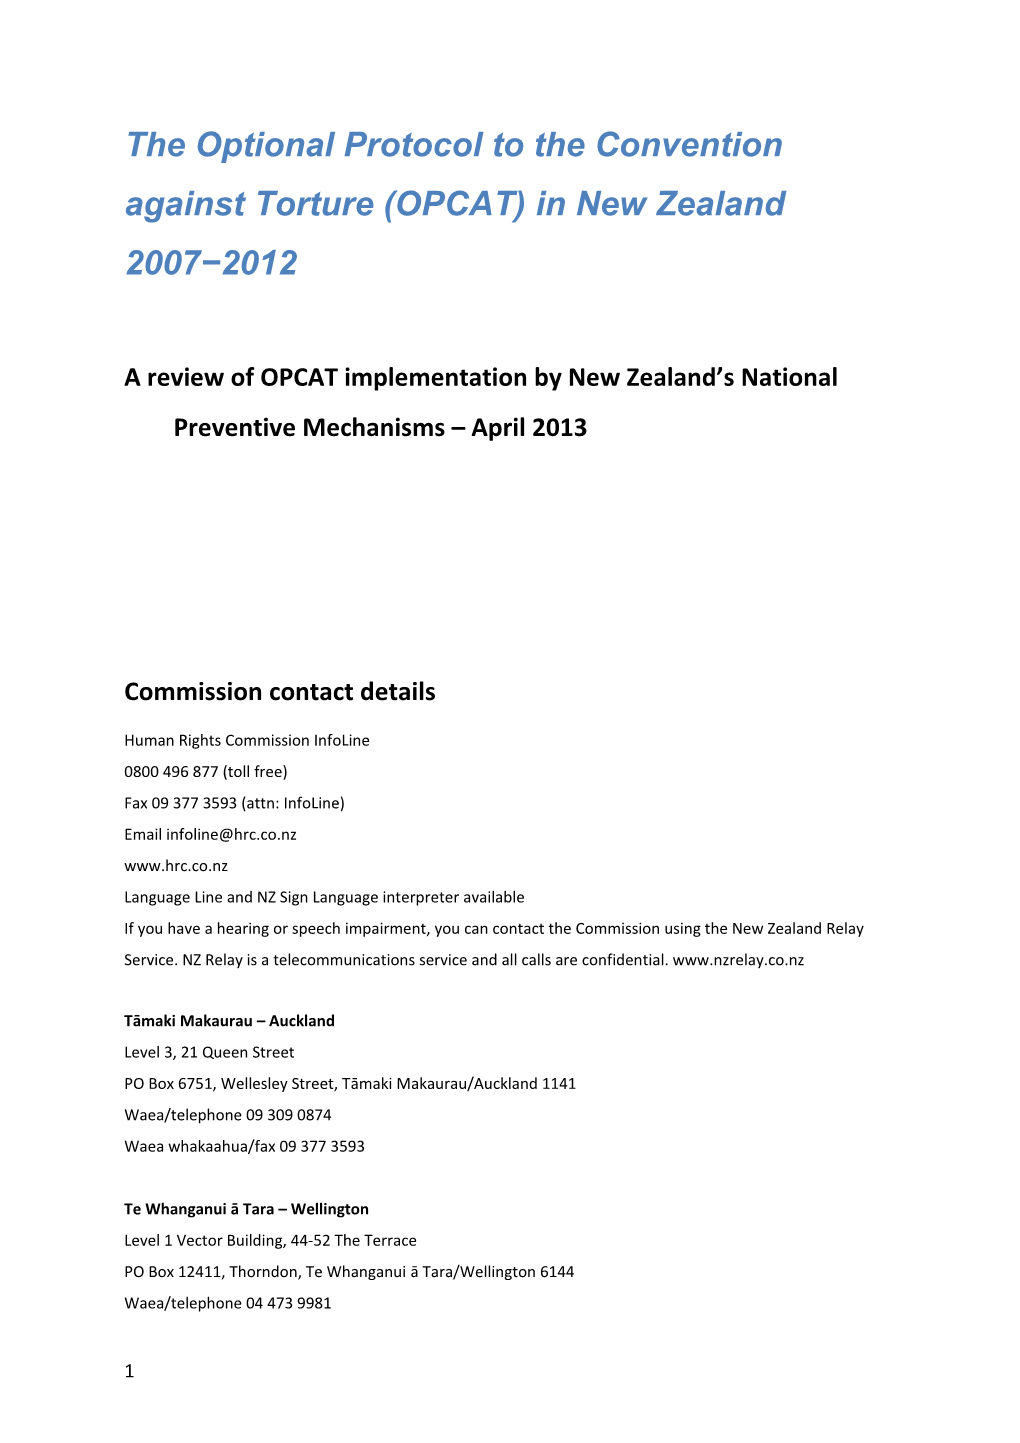 The Optional Protocol to the Convention Against Torture (OPCAT) in New Zealand 2007 2012